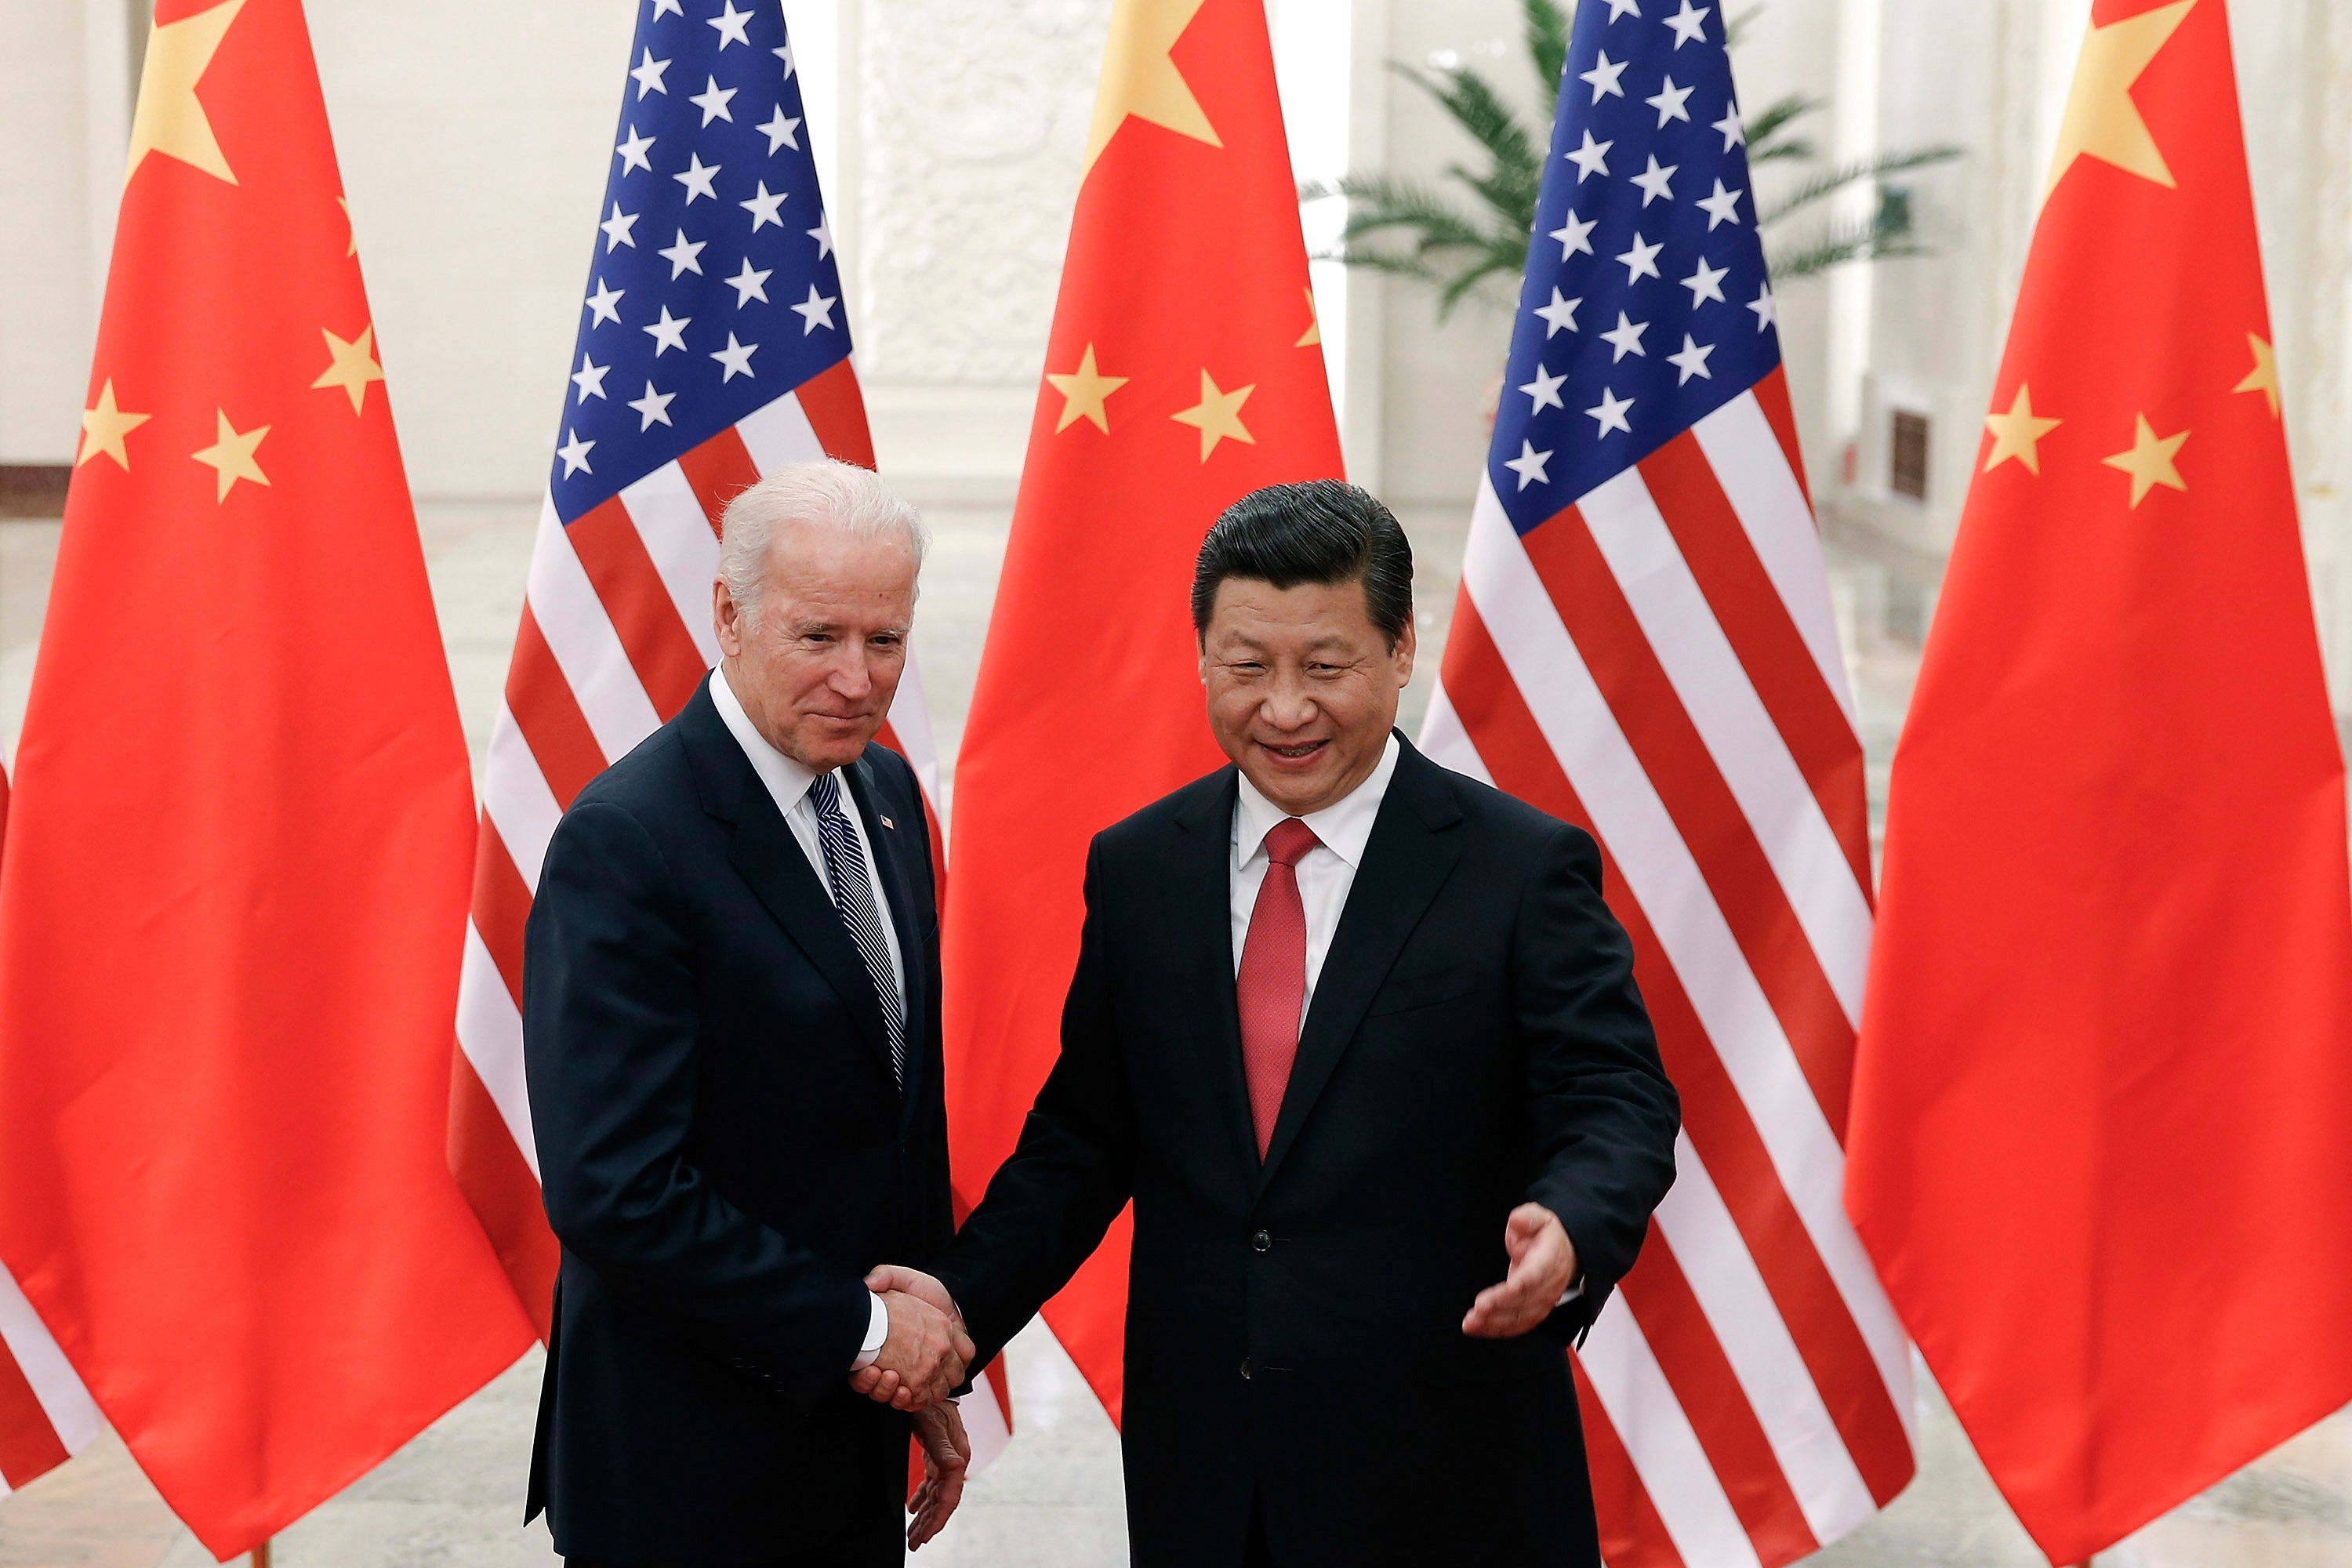 &nbsp;The Biden administration will have to grapple with the geopolitical challenges of Russia and China